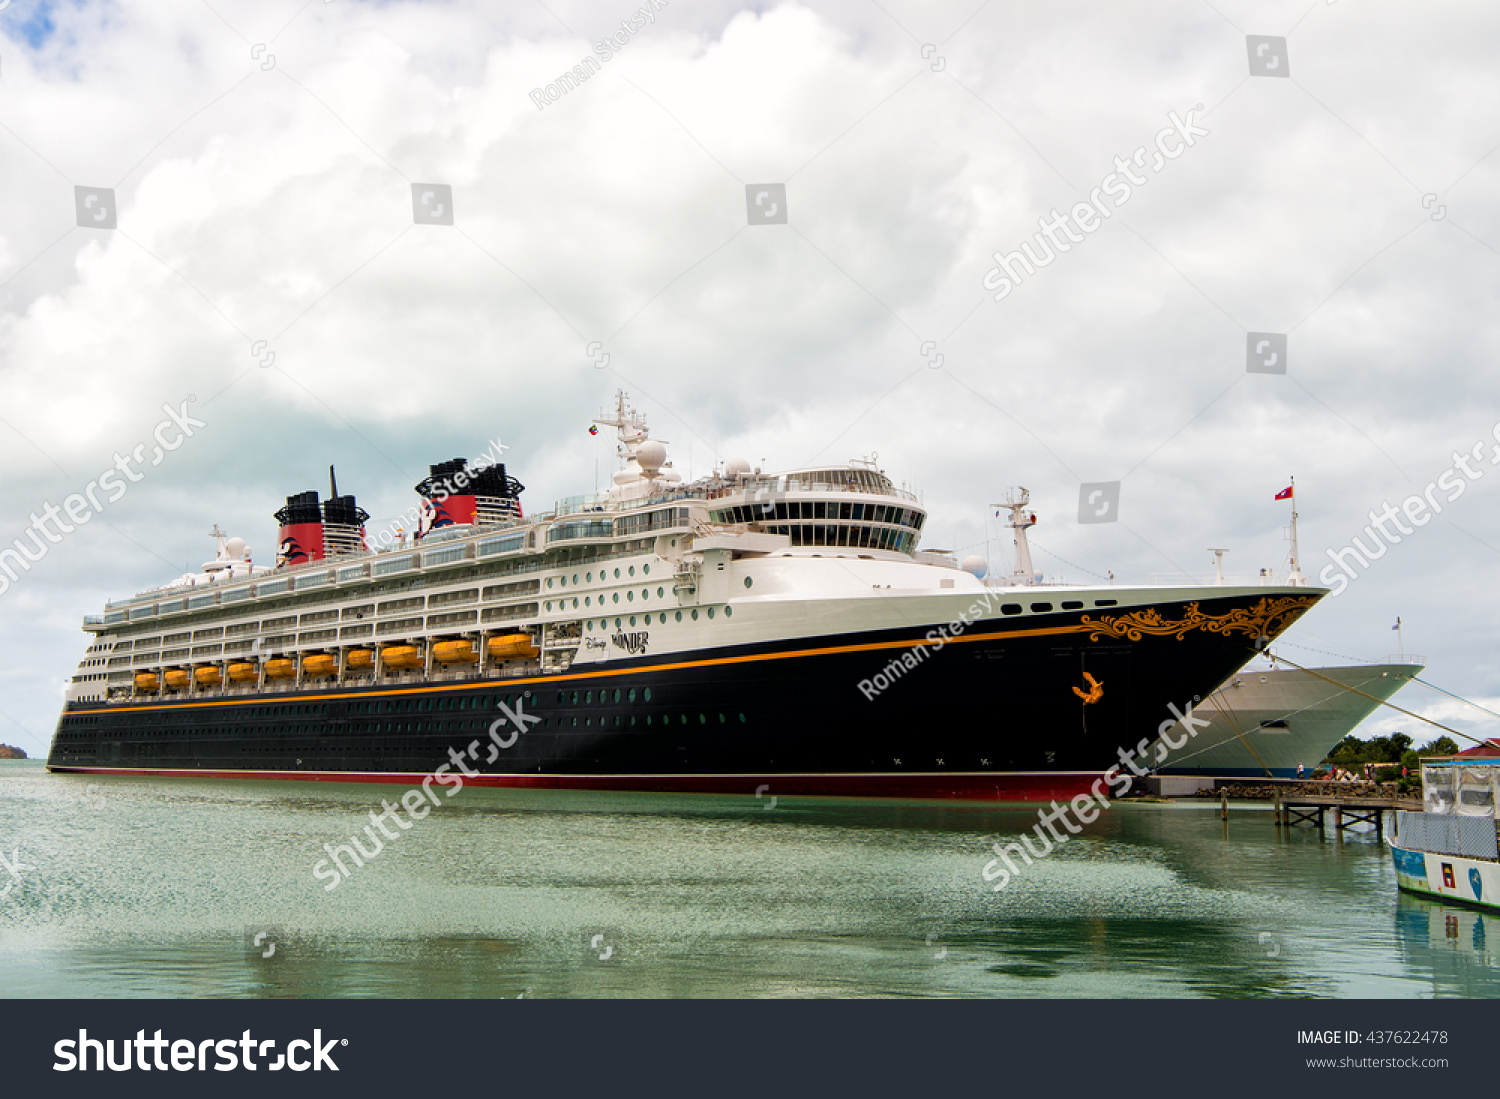 SIDE DISNEY CRUISE SHIP WONDER POSTER 24 X 36 Inches Looks beautiful 